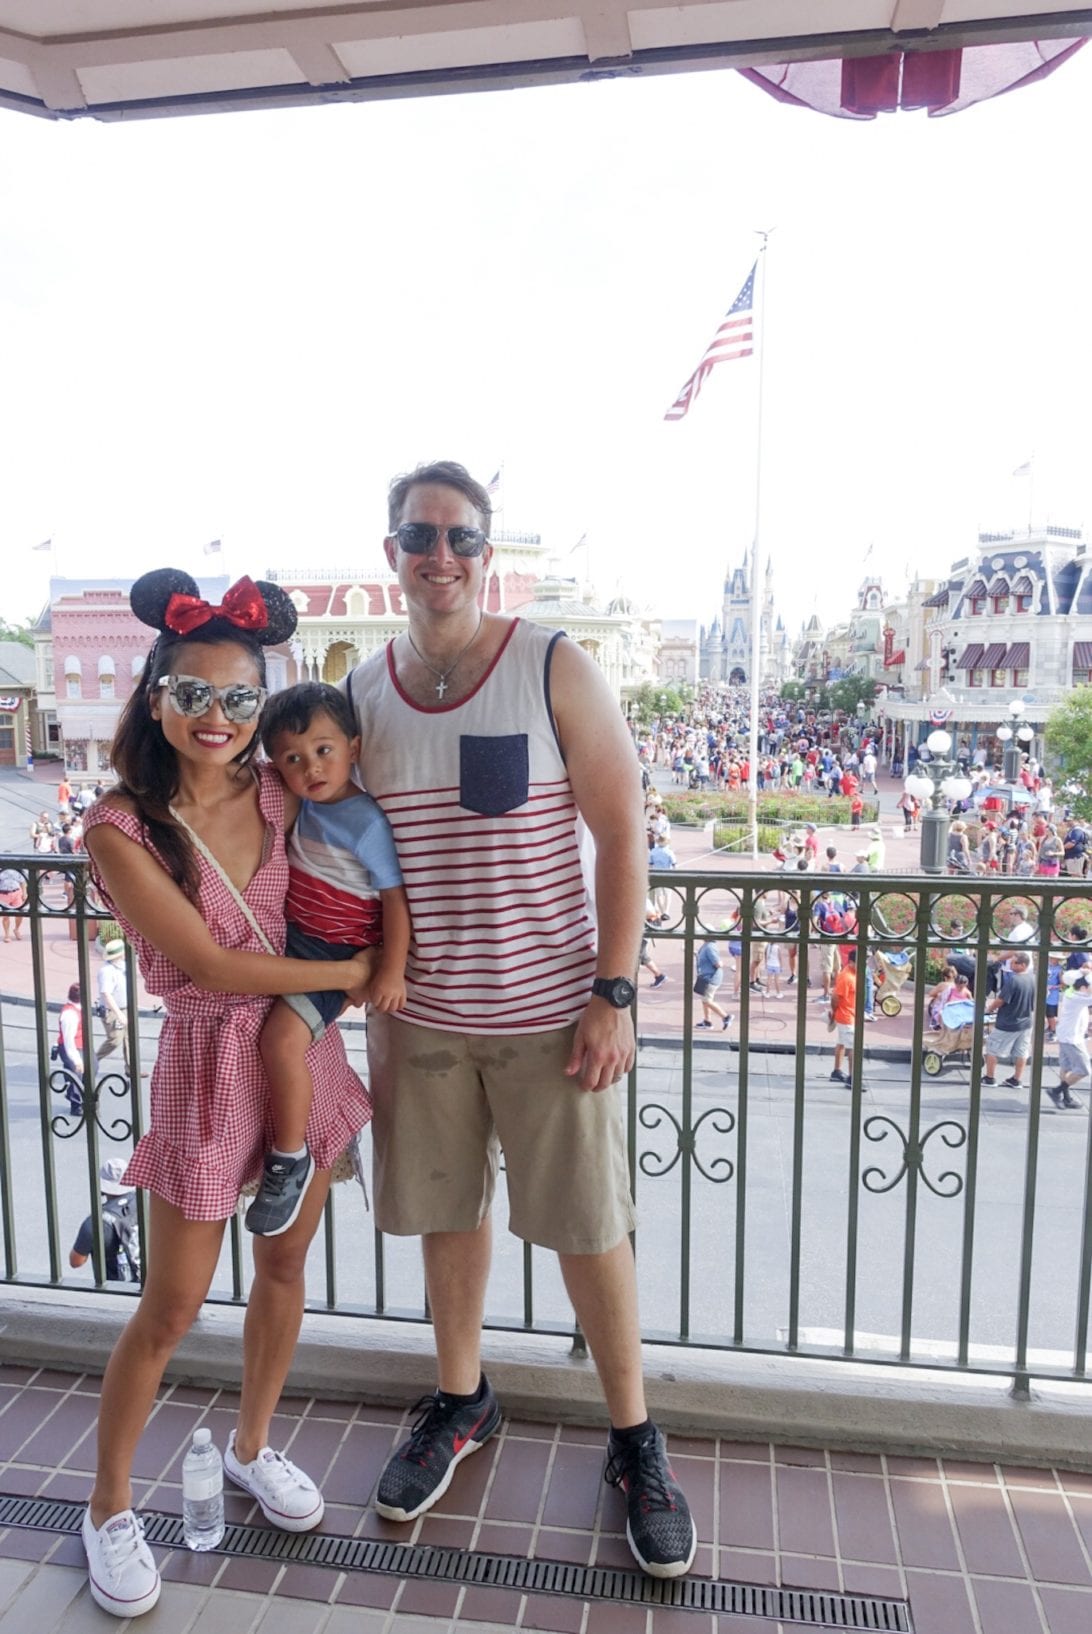 DISNEY WITH A TODDLER, TIPS FOR FAMILIES VISITING DISNEY, DISNEY WORLD, WHAT TO DO IN DISNEY WORLD, VISITING DISNEY WORLD, FIRST TIME IN DISNEY WORLD, VISITING DISNEY WORLD WITH A TODDLER, FAMILY TRIPS TO DISNEY WORLD, MAGIC KINGDOM